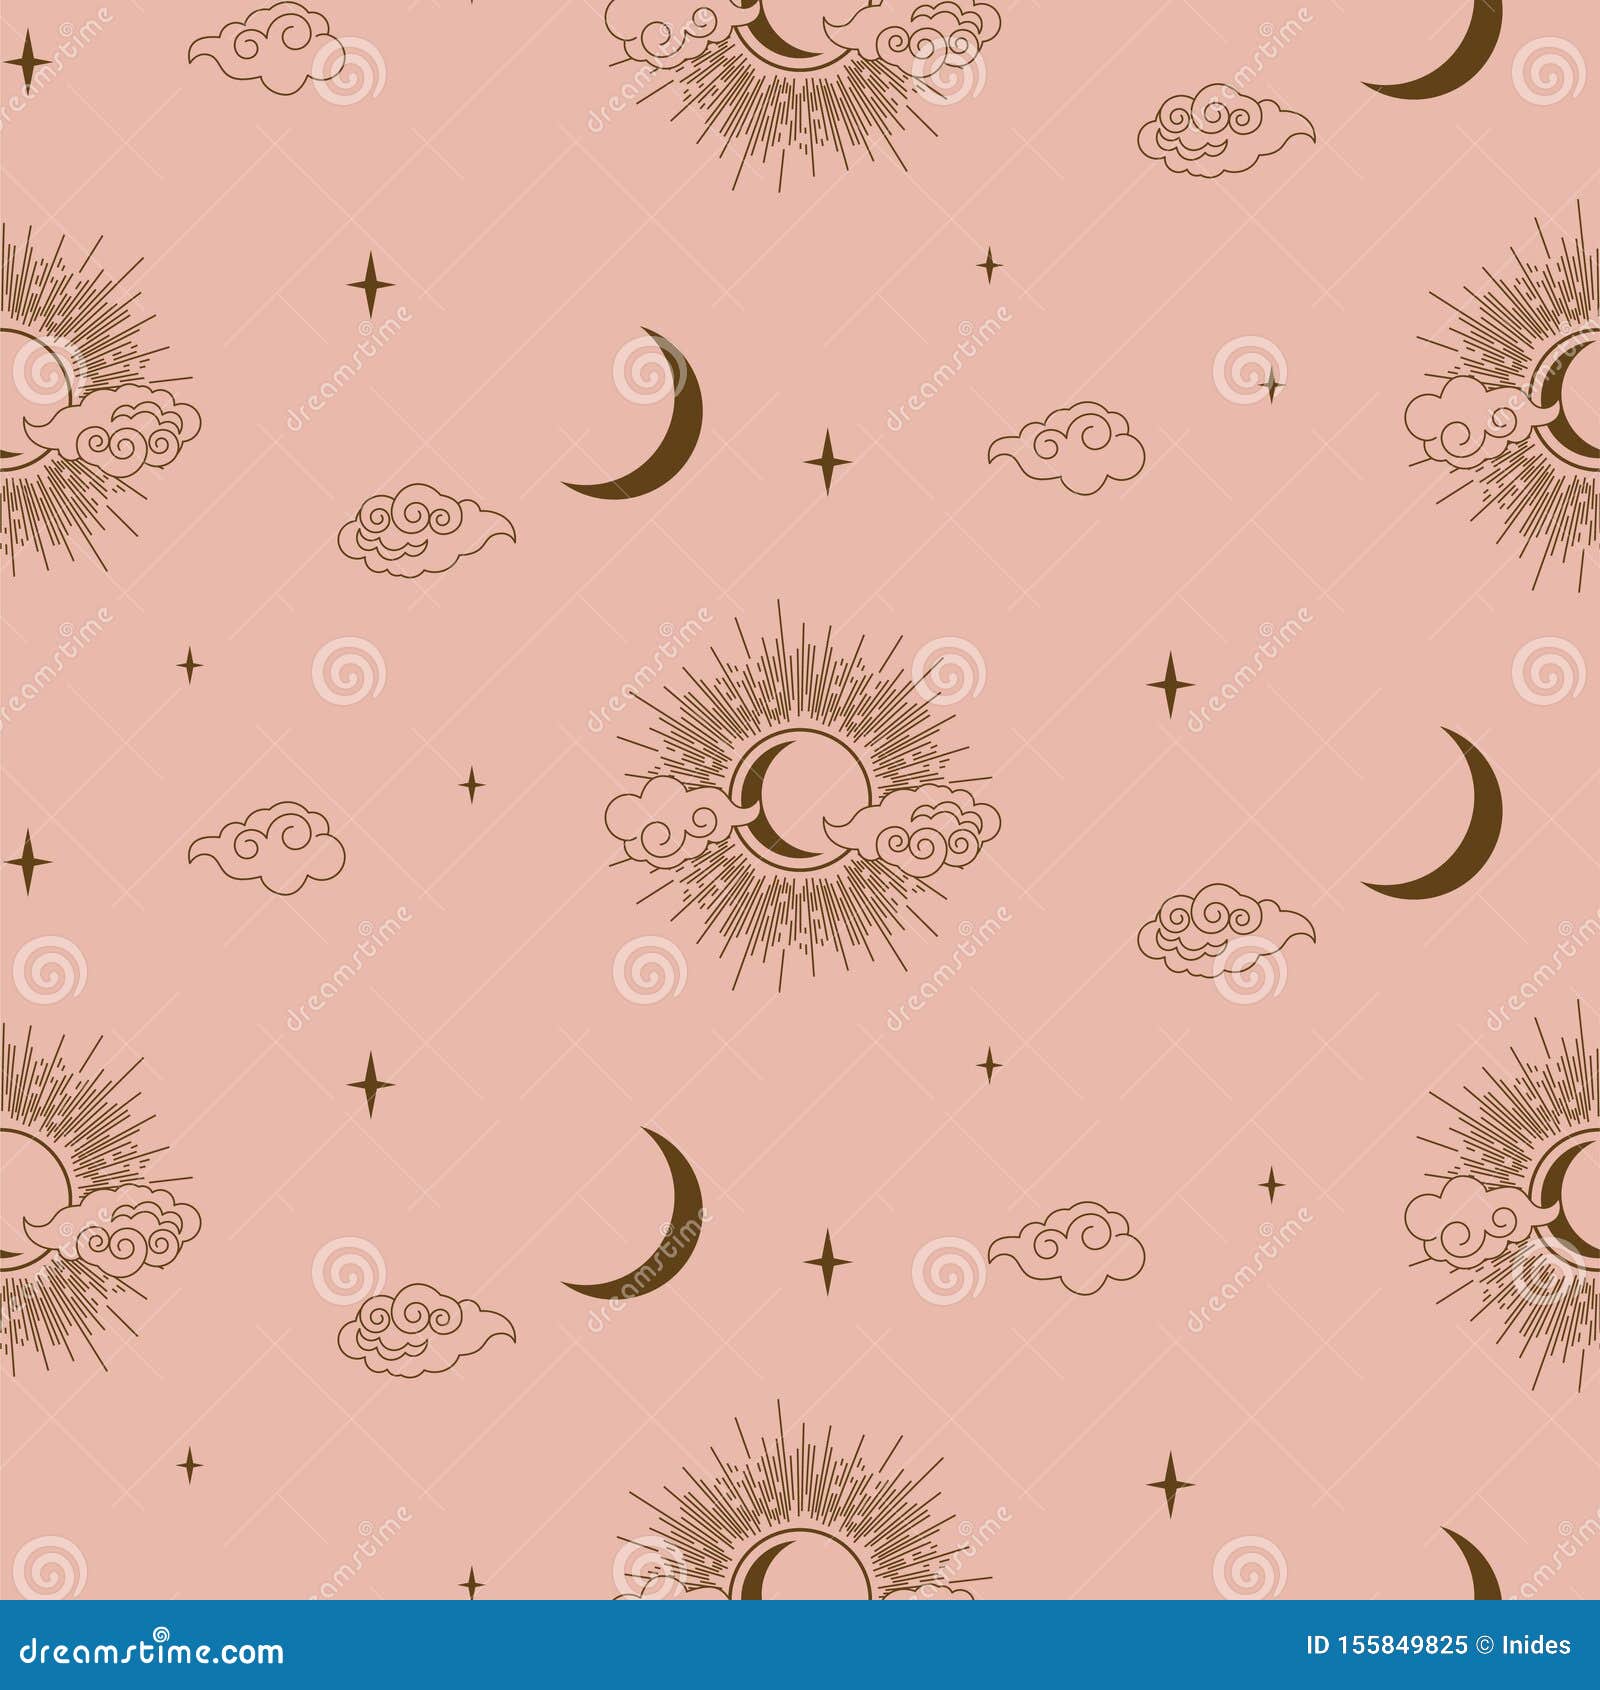 Cute  Aesthetic Sun Wallpapers to Brighten up Your Phone Screen this  Summer  The Mood Guide